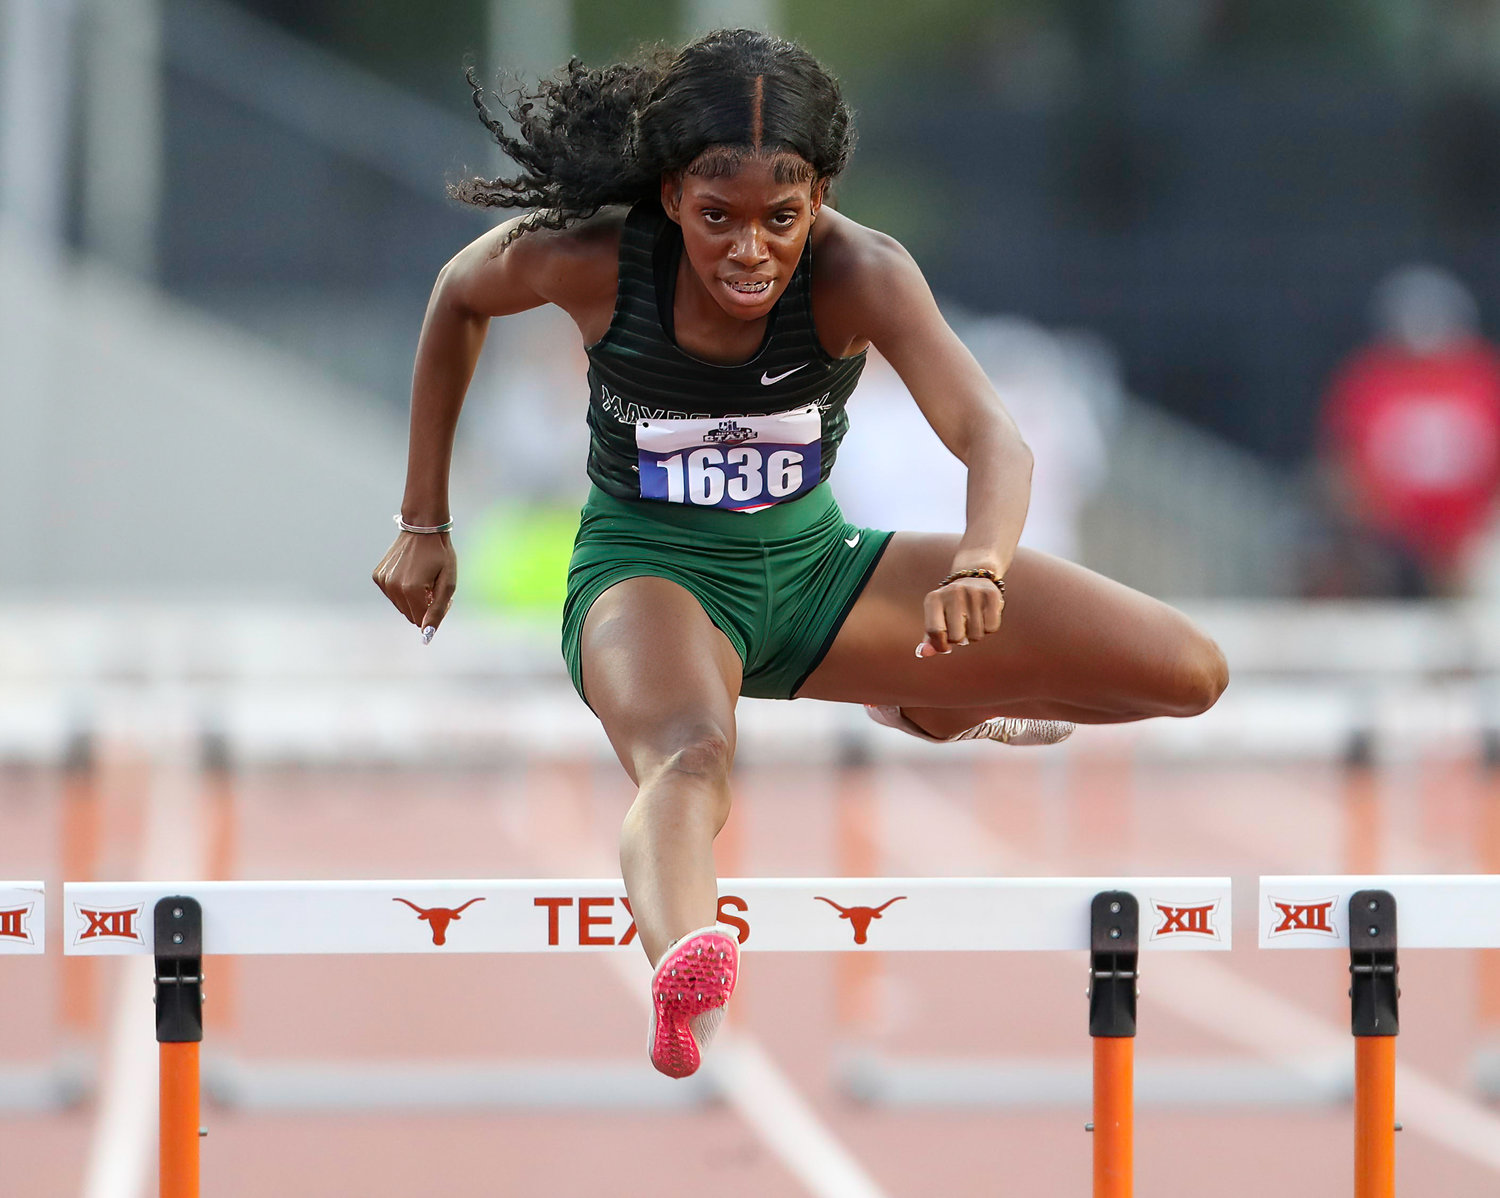 Simone Ballard of Mayde Creek runs in the Class 6A girls 300-meter hurdles at the UIL State Track and Field Meet on May 14, 2022 in Austin, Texas. Ballard earned a gold medal in the event with a time of 41.11.